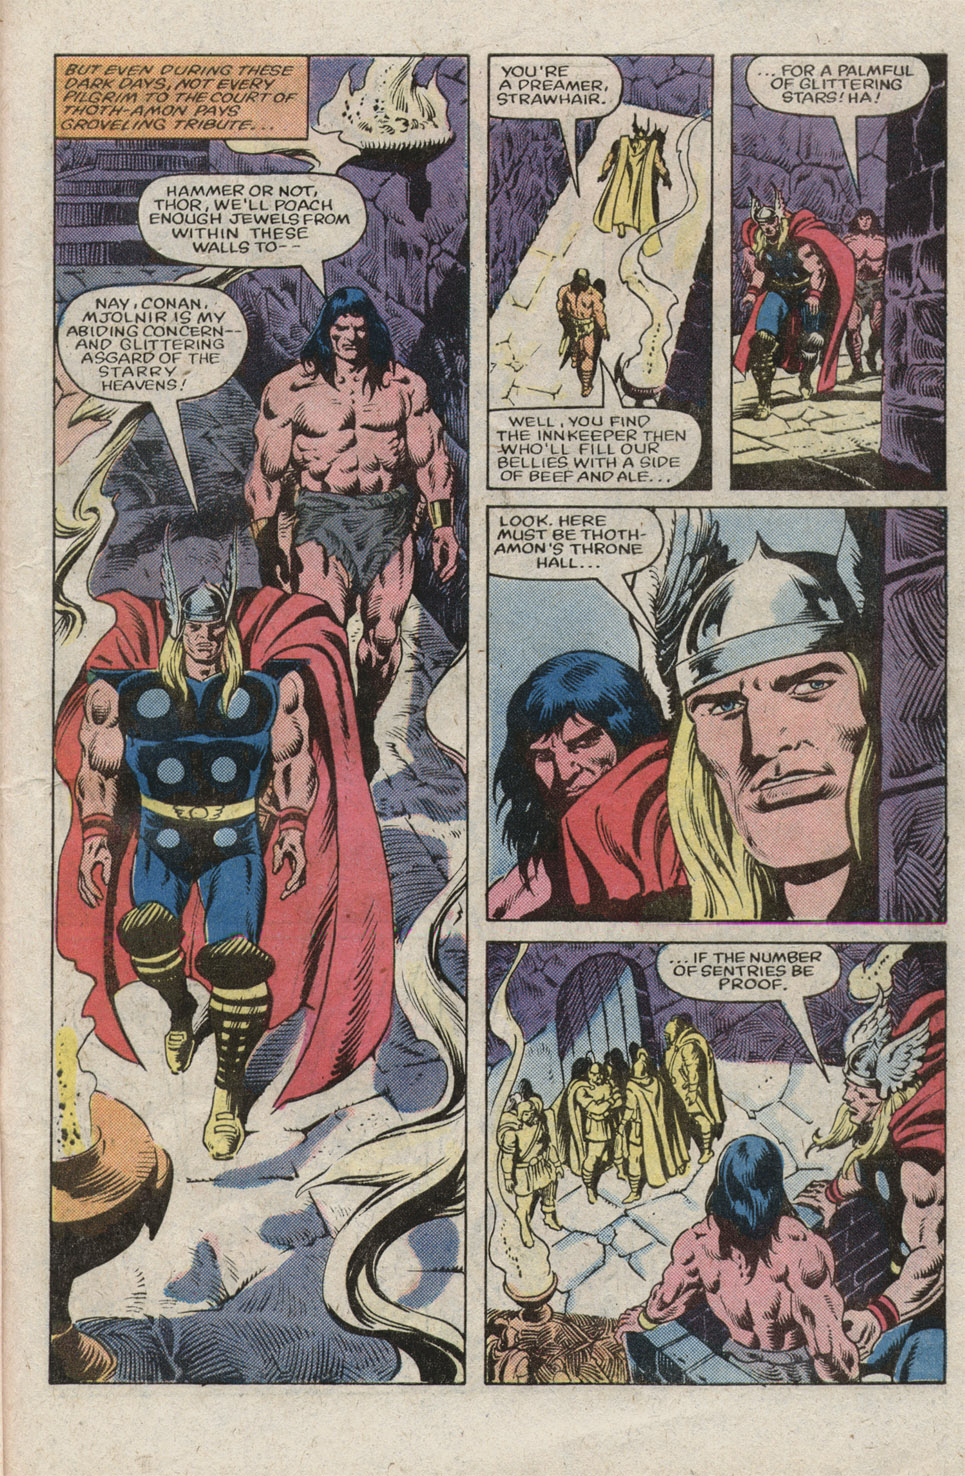 What If? (1977) issue 39 - Thor battled conan - Page 31